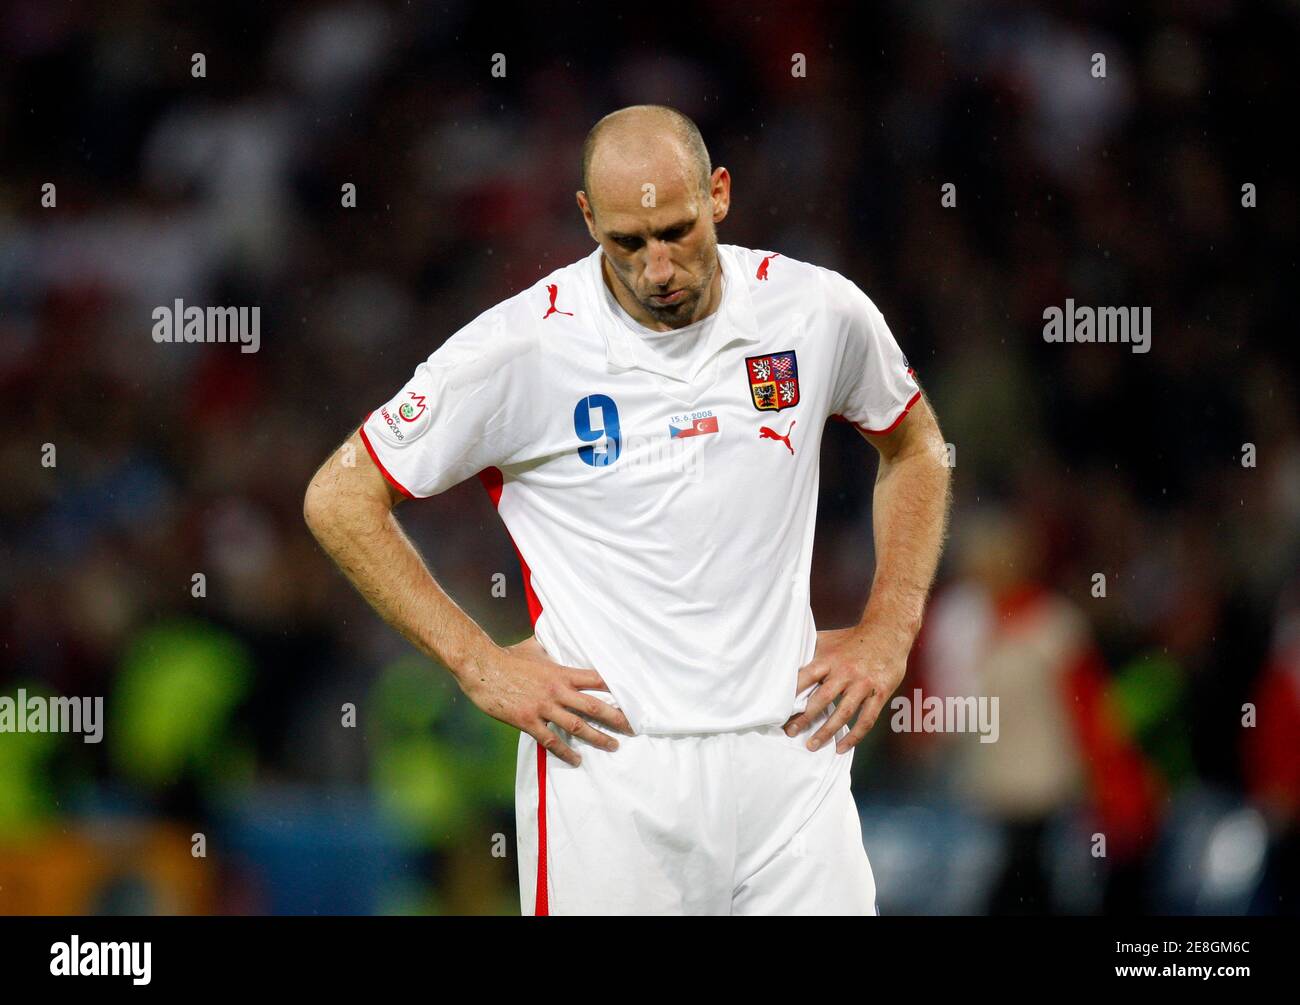 Czech Republic's Jan Koller reacts after their Group A Euro 2008 soccer match defeat to Turkey at Stade de Geneve stadium in Geneva June 15, 2008.     REUTERS/Jerry Lampen (SWITZERLAND)  MOBILE OUT. EDITORIAL USE ONLY Stock Photo